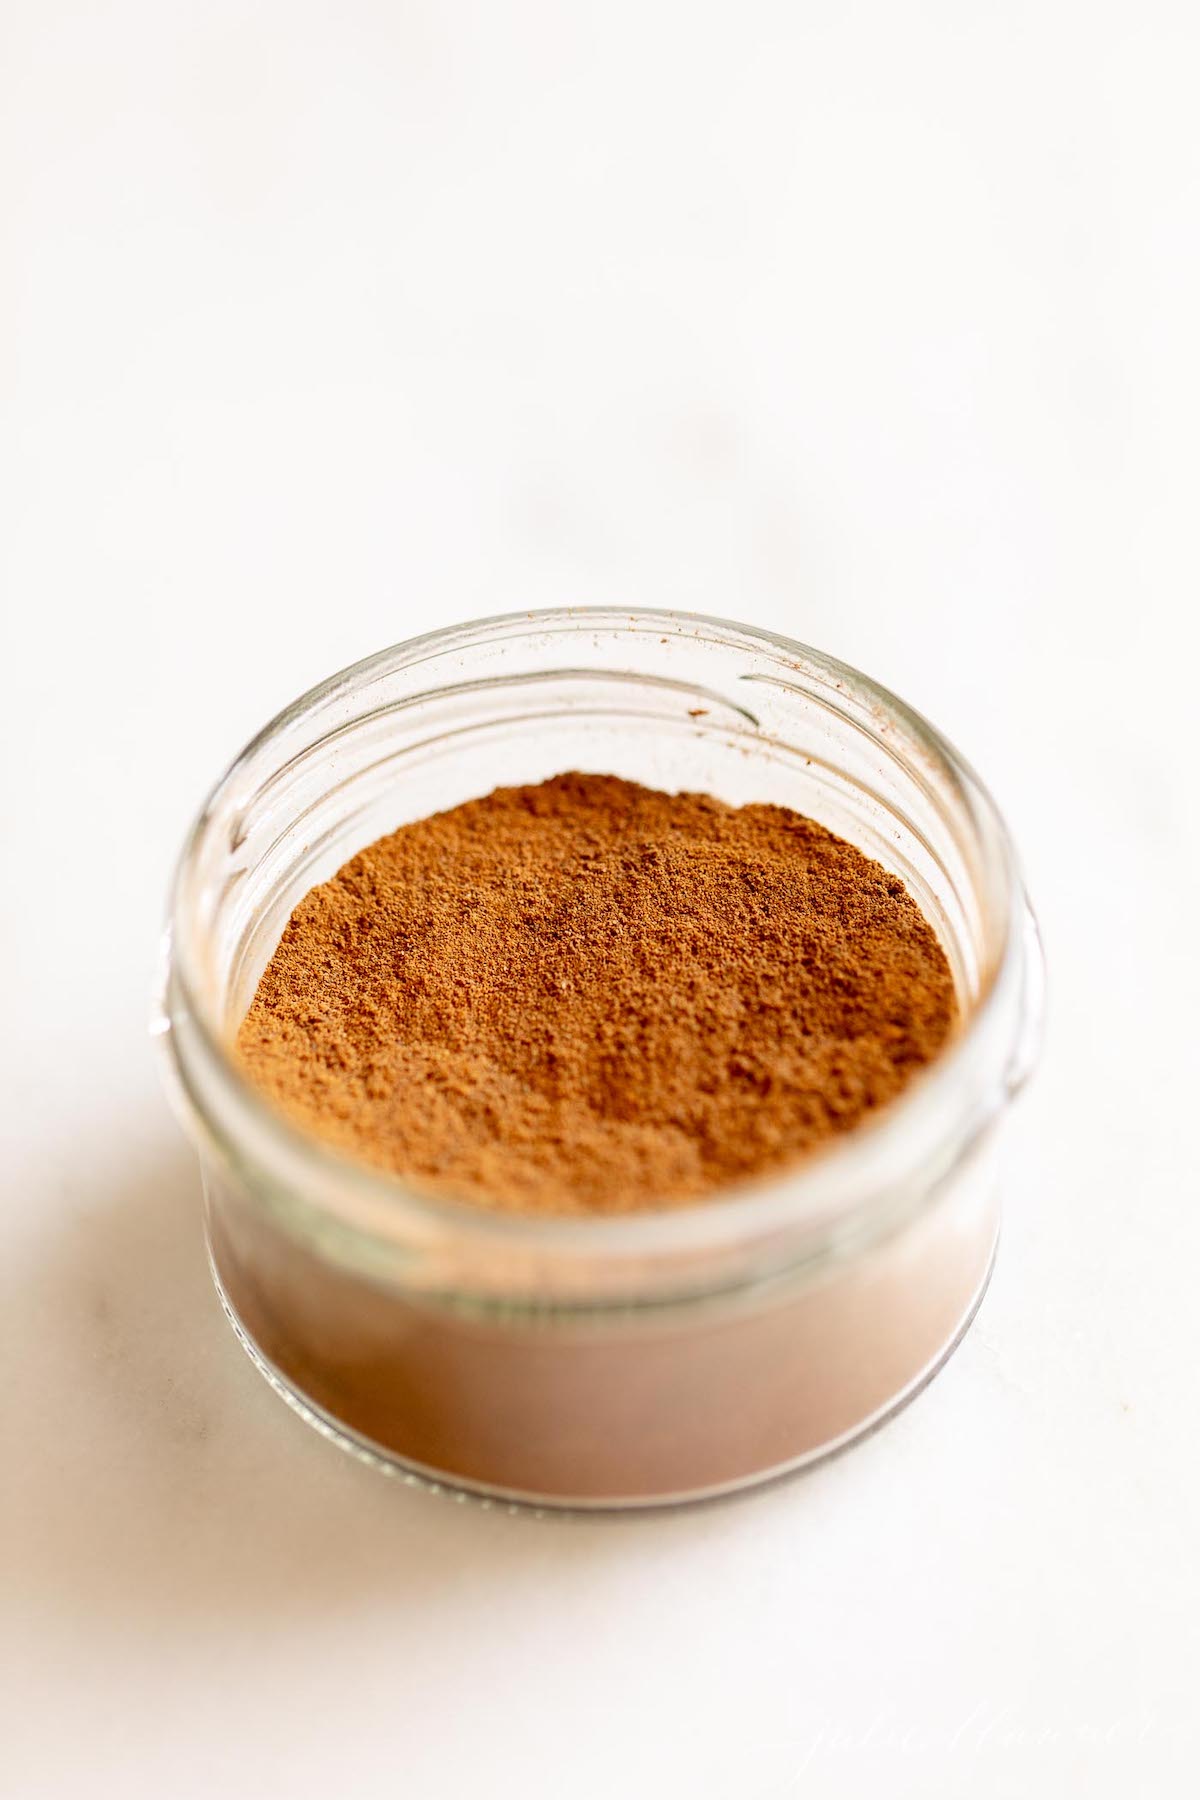 Homemade allspice blend in a small glass jar on a white countertop.